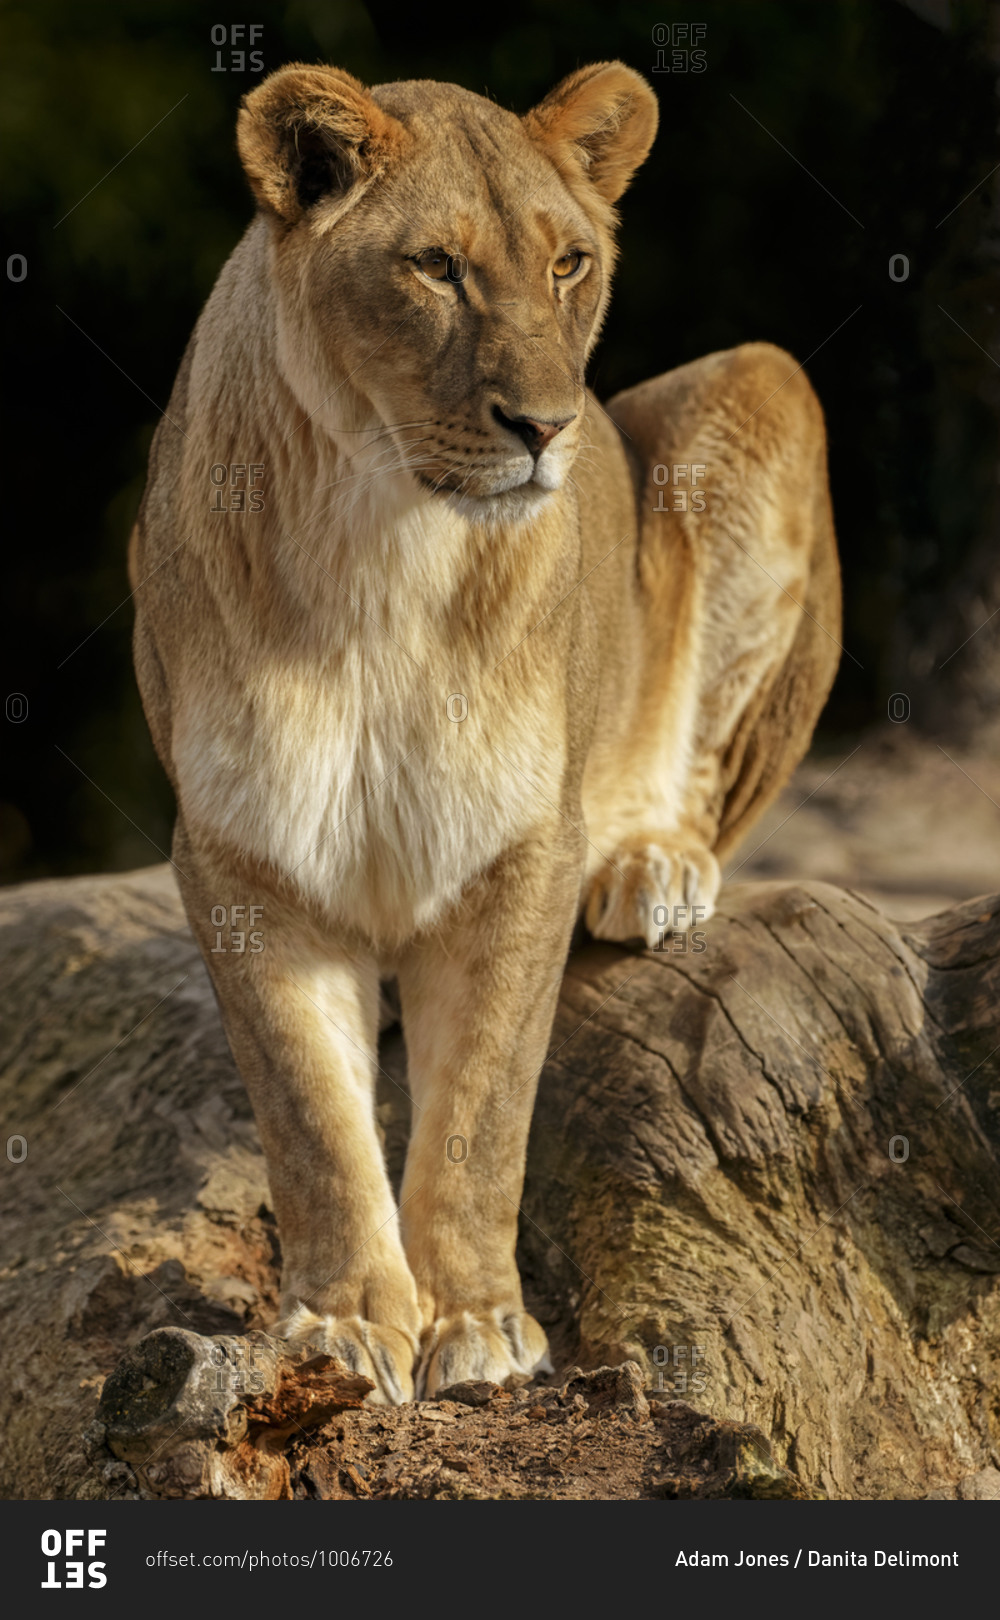 Female Lioness, Panthera leo, perched and alert